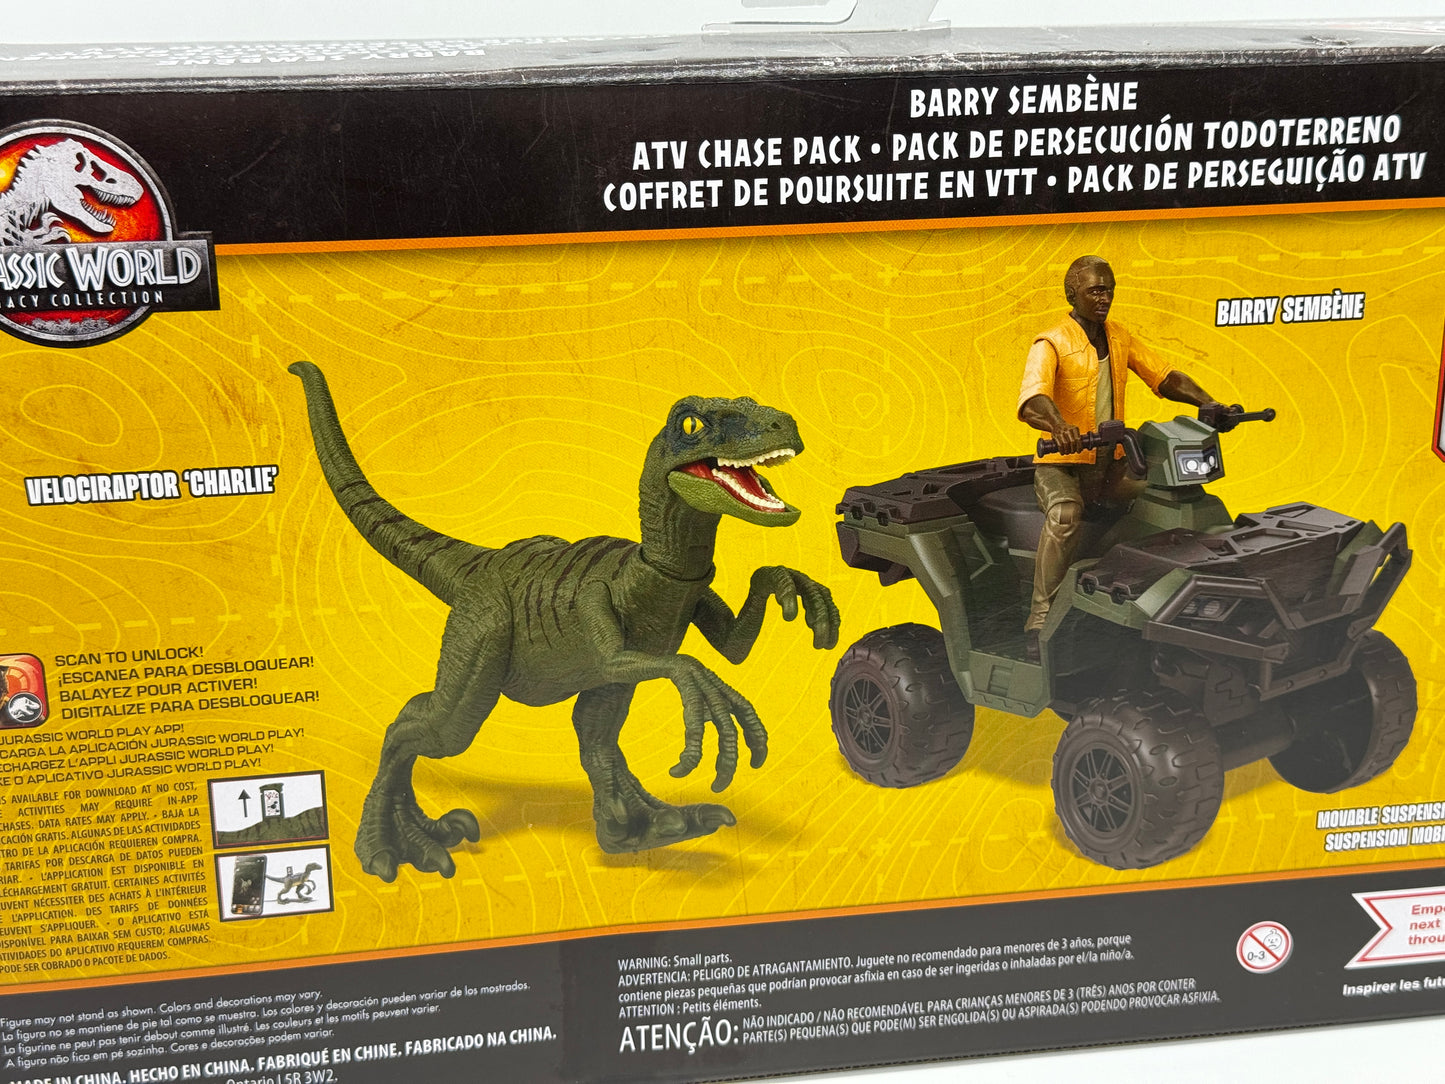 Jurassic World Legacy Collection "Barry Sembène ATV Chase Pack" Mattel US (2023)